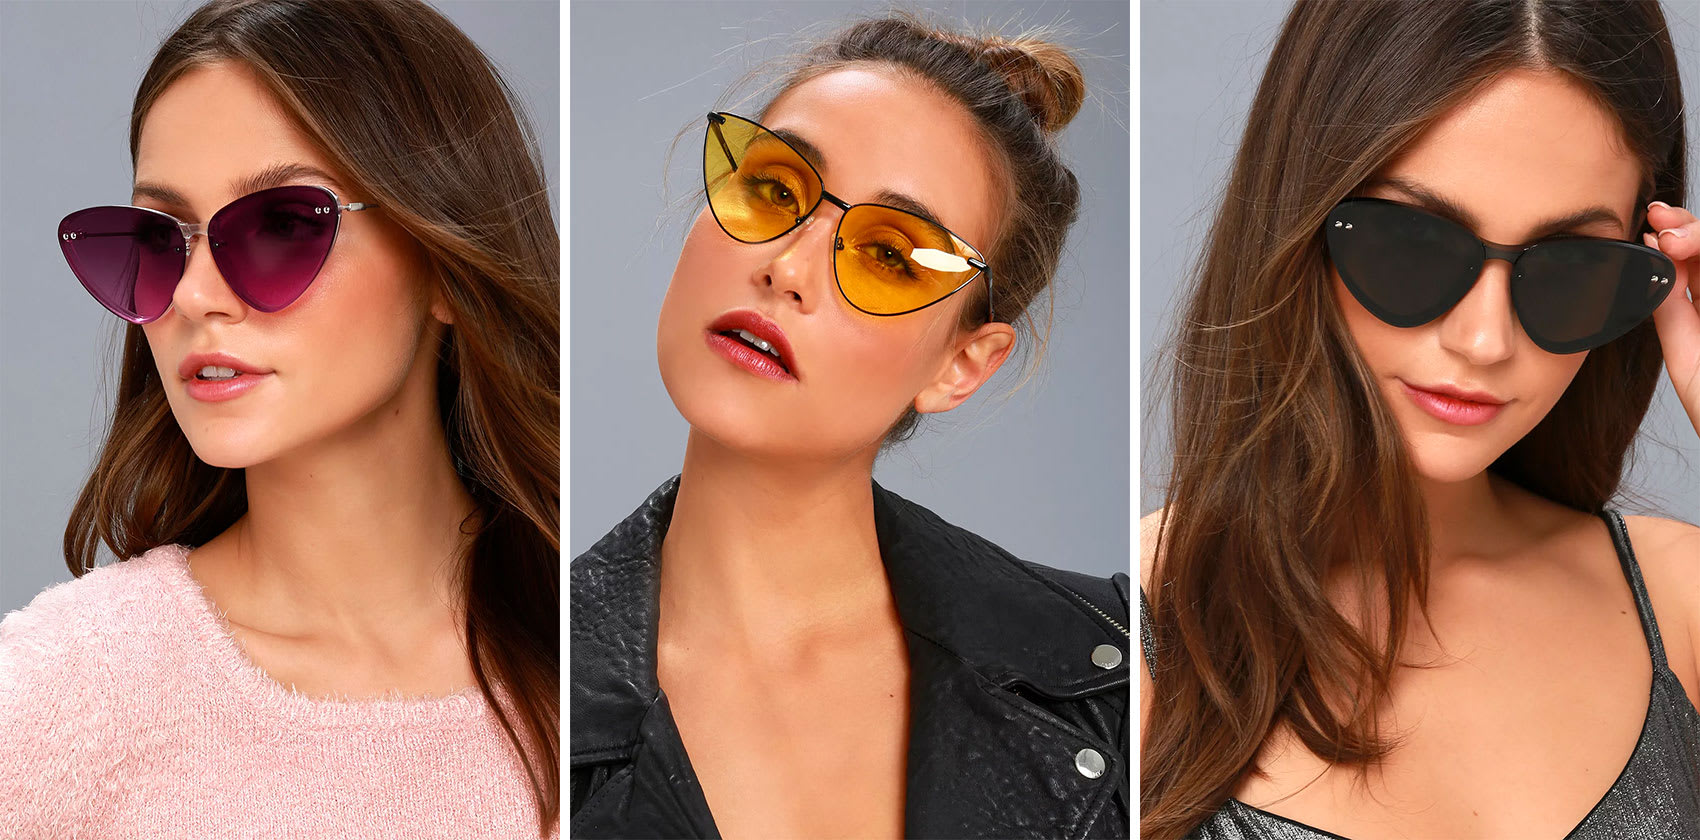 The Best Sunglasses for Your Face - Lulus.com Fashion Blog